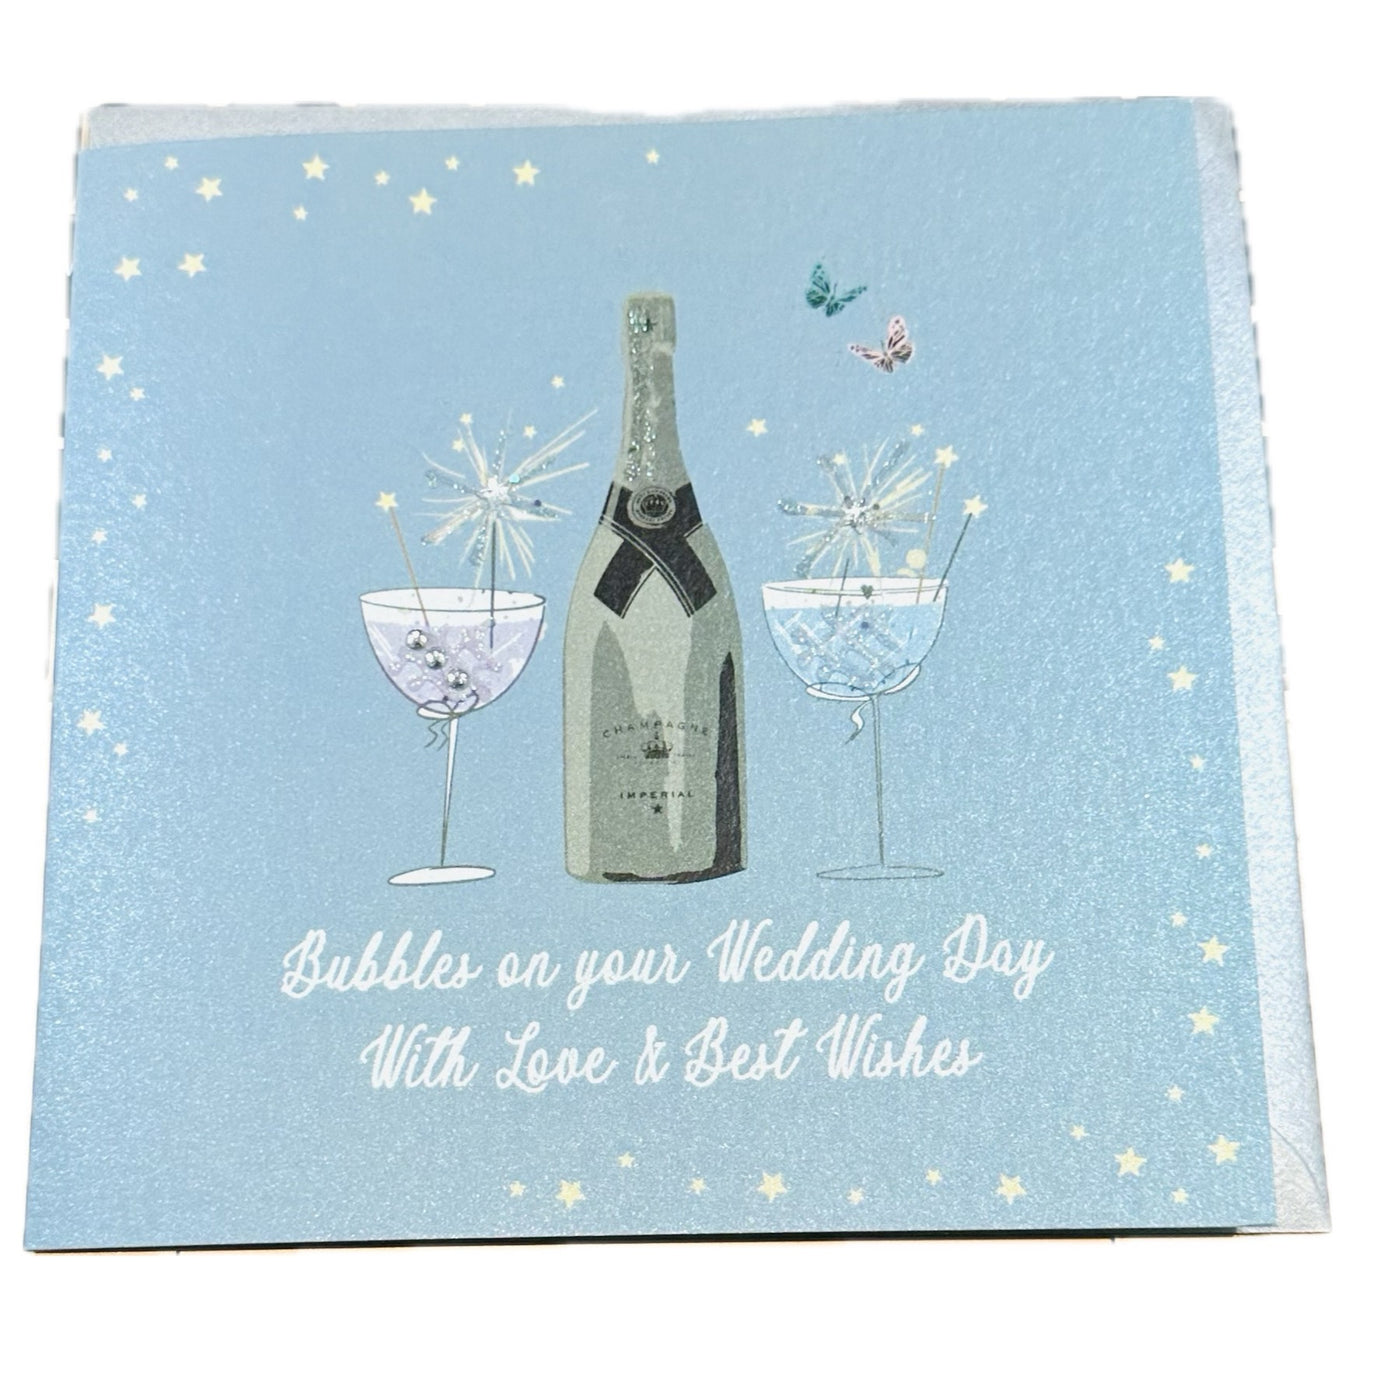 Wedding Day Champagne & Sparkling Glasses Teal Card - White Cotton Cards